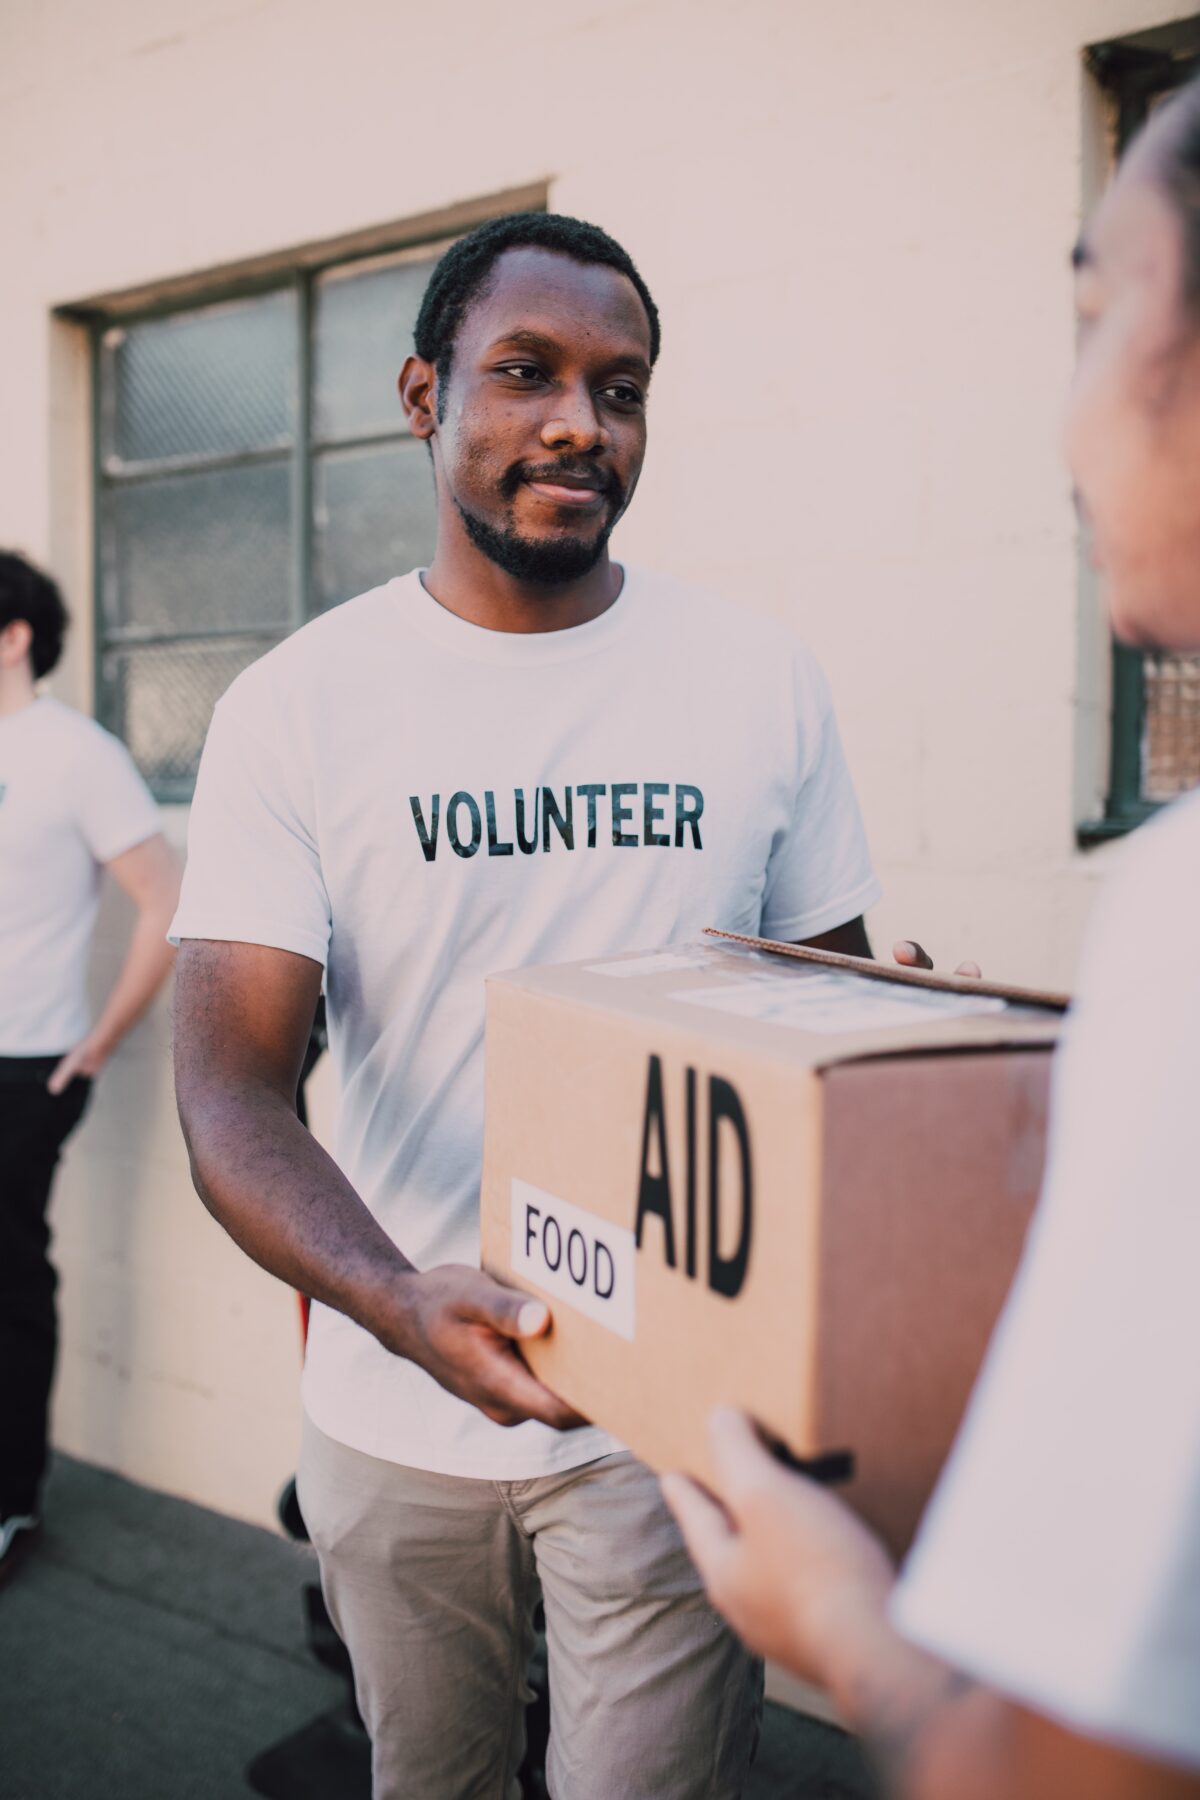 Man holding box marked "Aid" and wearing a tee shirt which says "Volunteer."